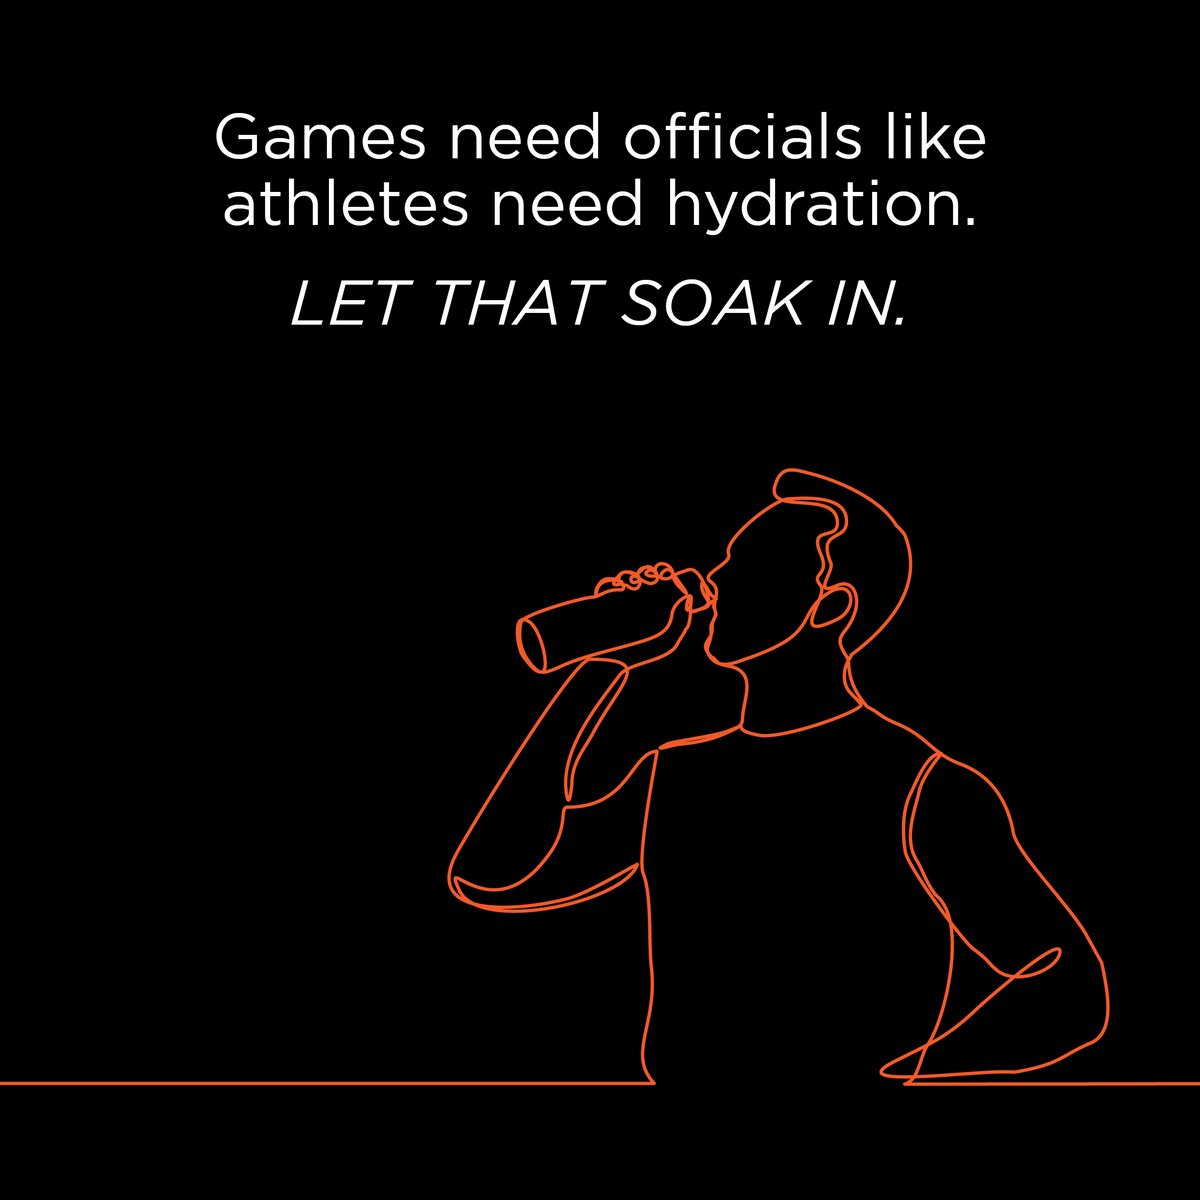 Hydration is key - even for officials 💦

#Officials #Hydration #SportsOfficials